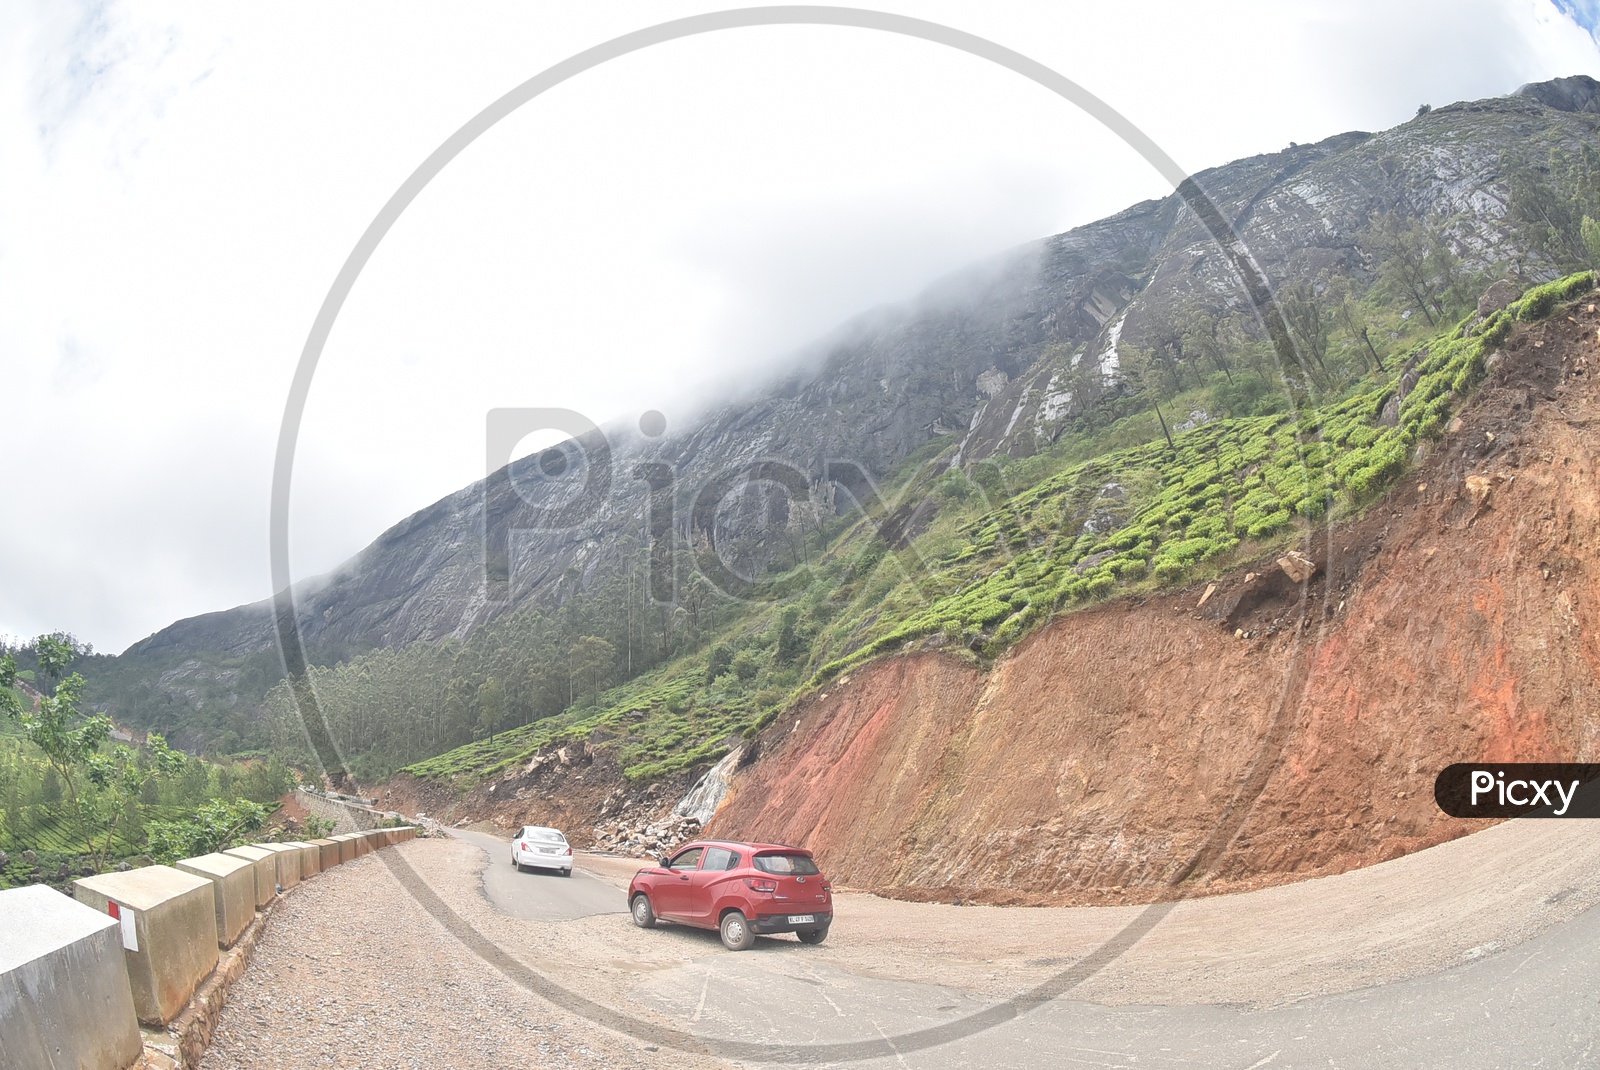 Beautiful Landscape of Munnar mountains with roadways in the foreground